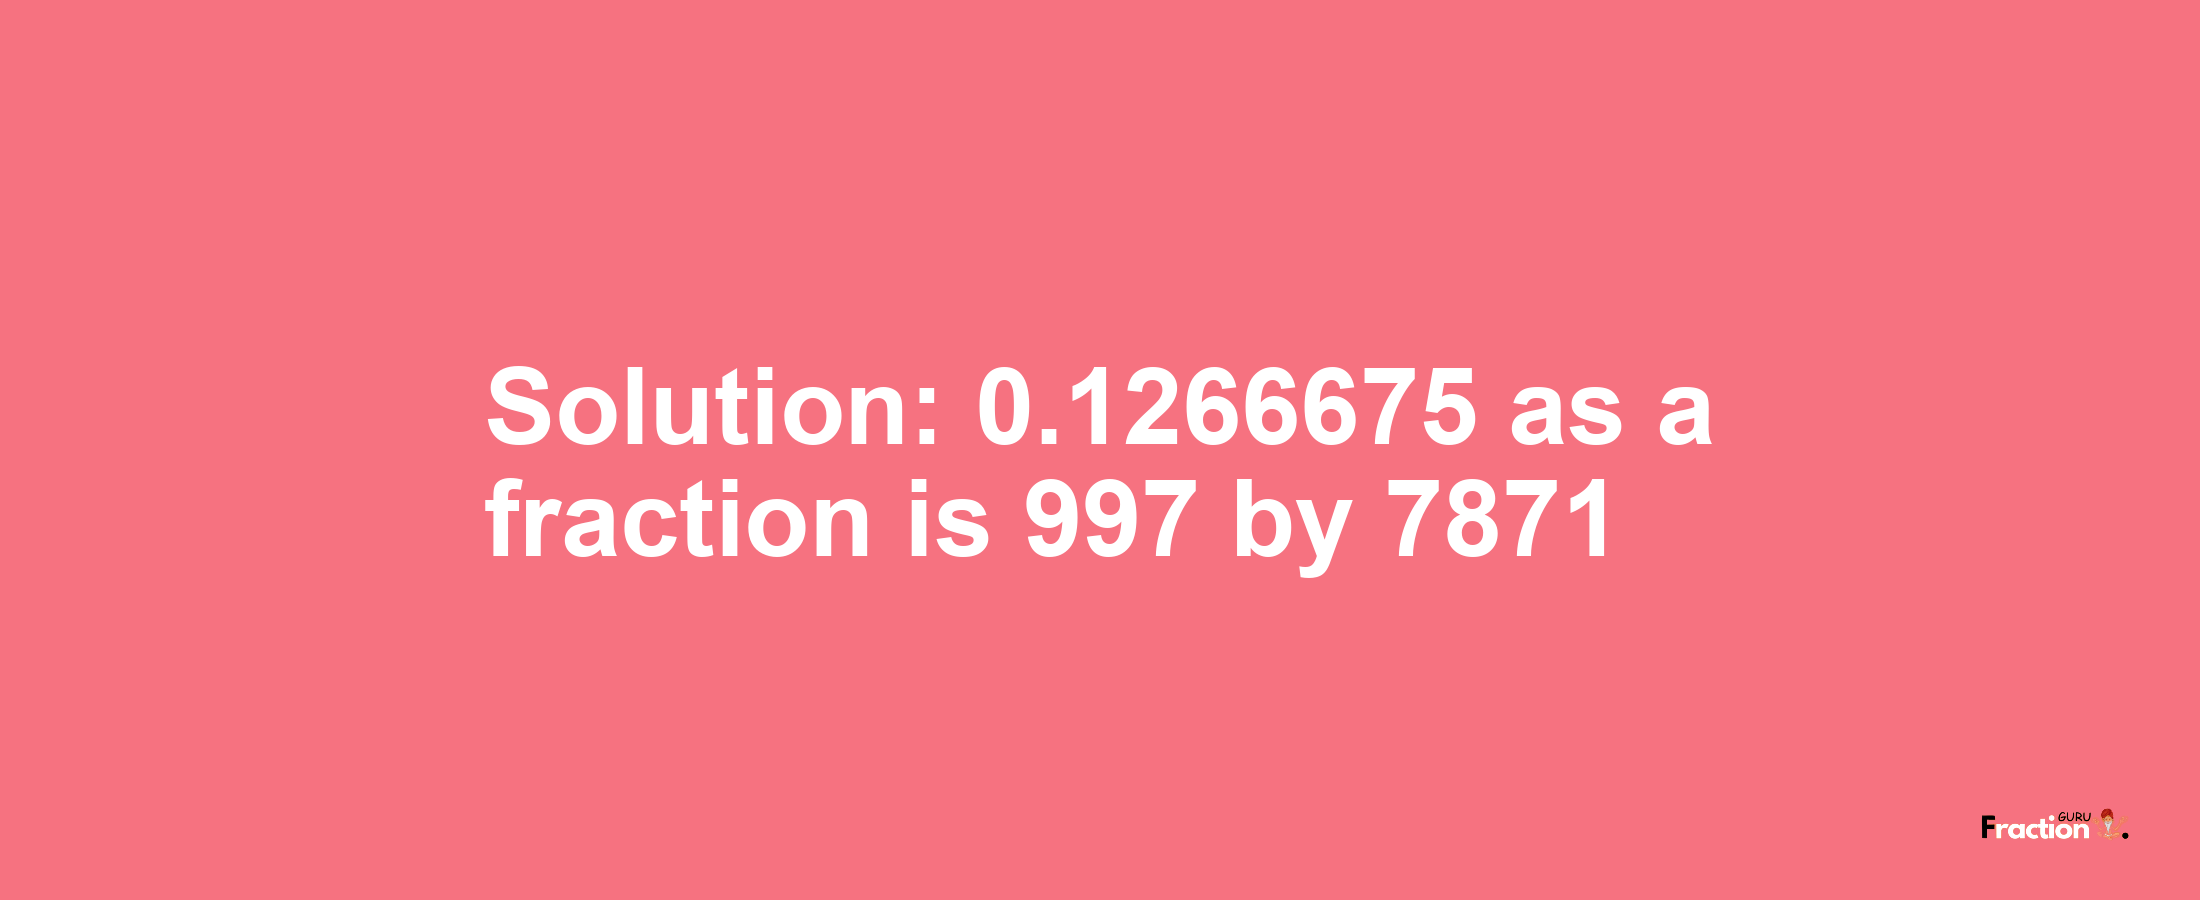 Solution:0.1266675 as a fraction is 997/7871